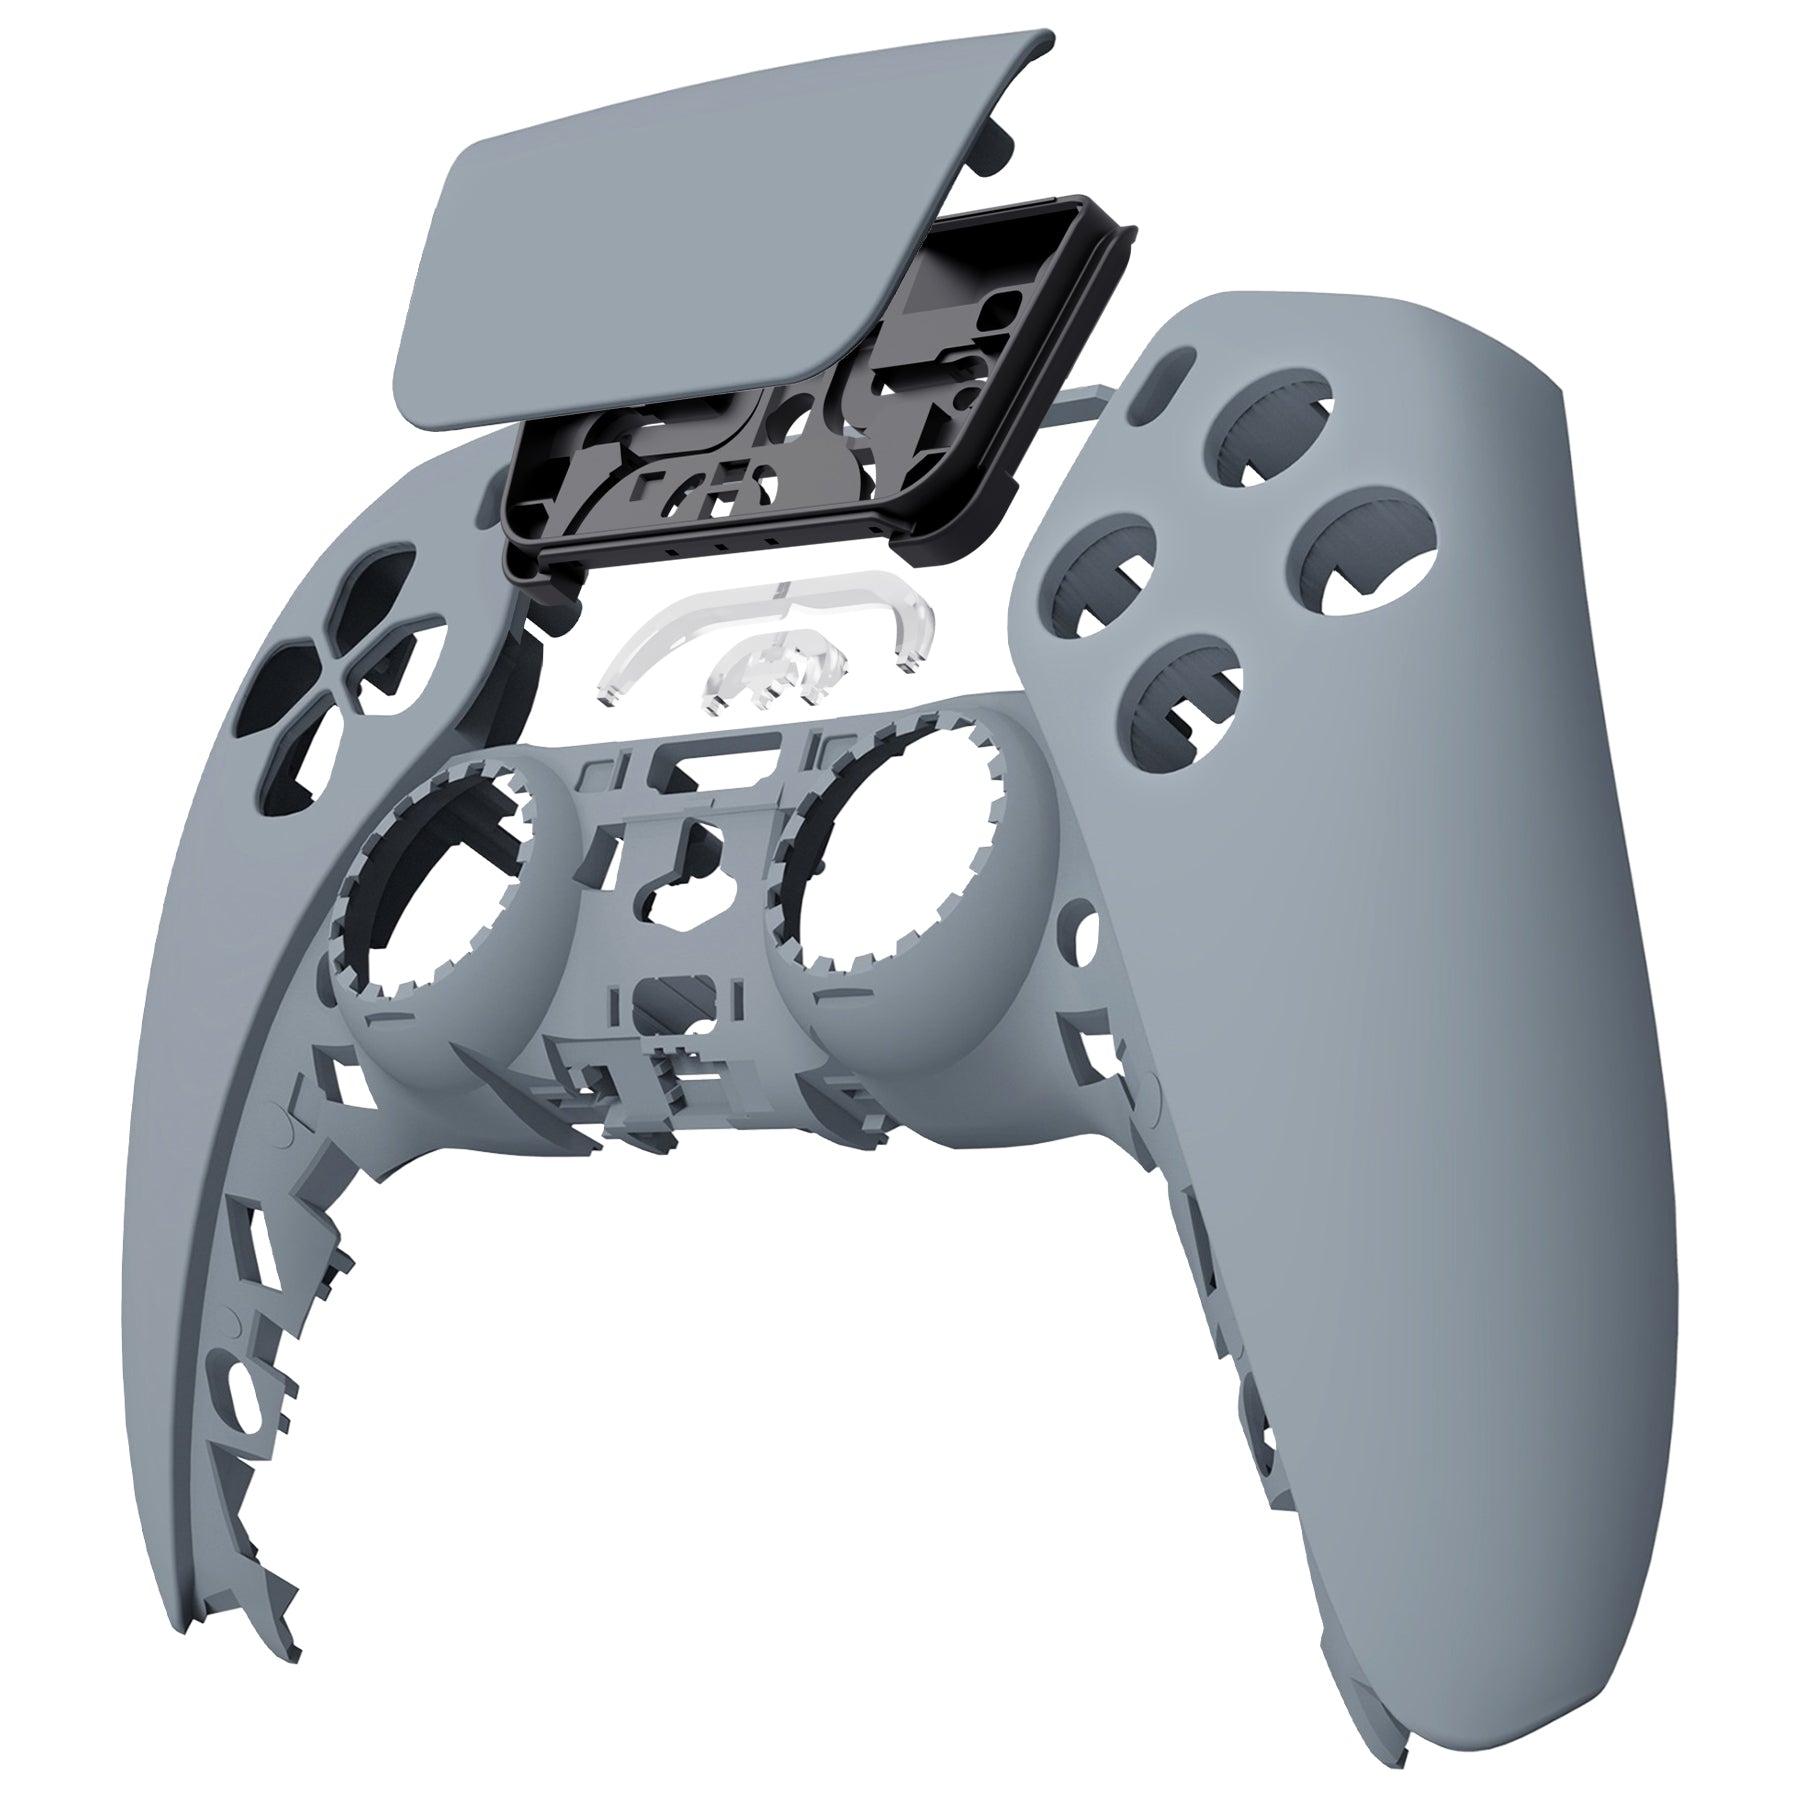 eXtremeRate Replacement Front Housing Shell with Touchpad Compatible with  PS5 Controller BDM-010/020/030/040 - New Hope Gray